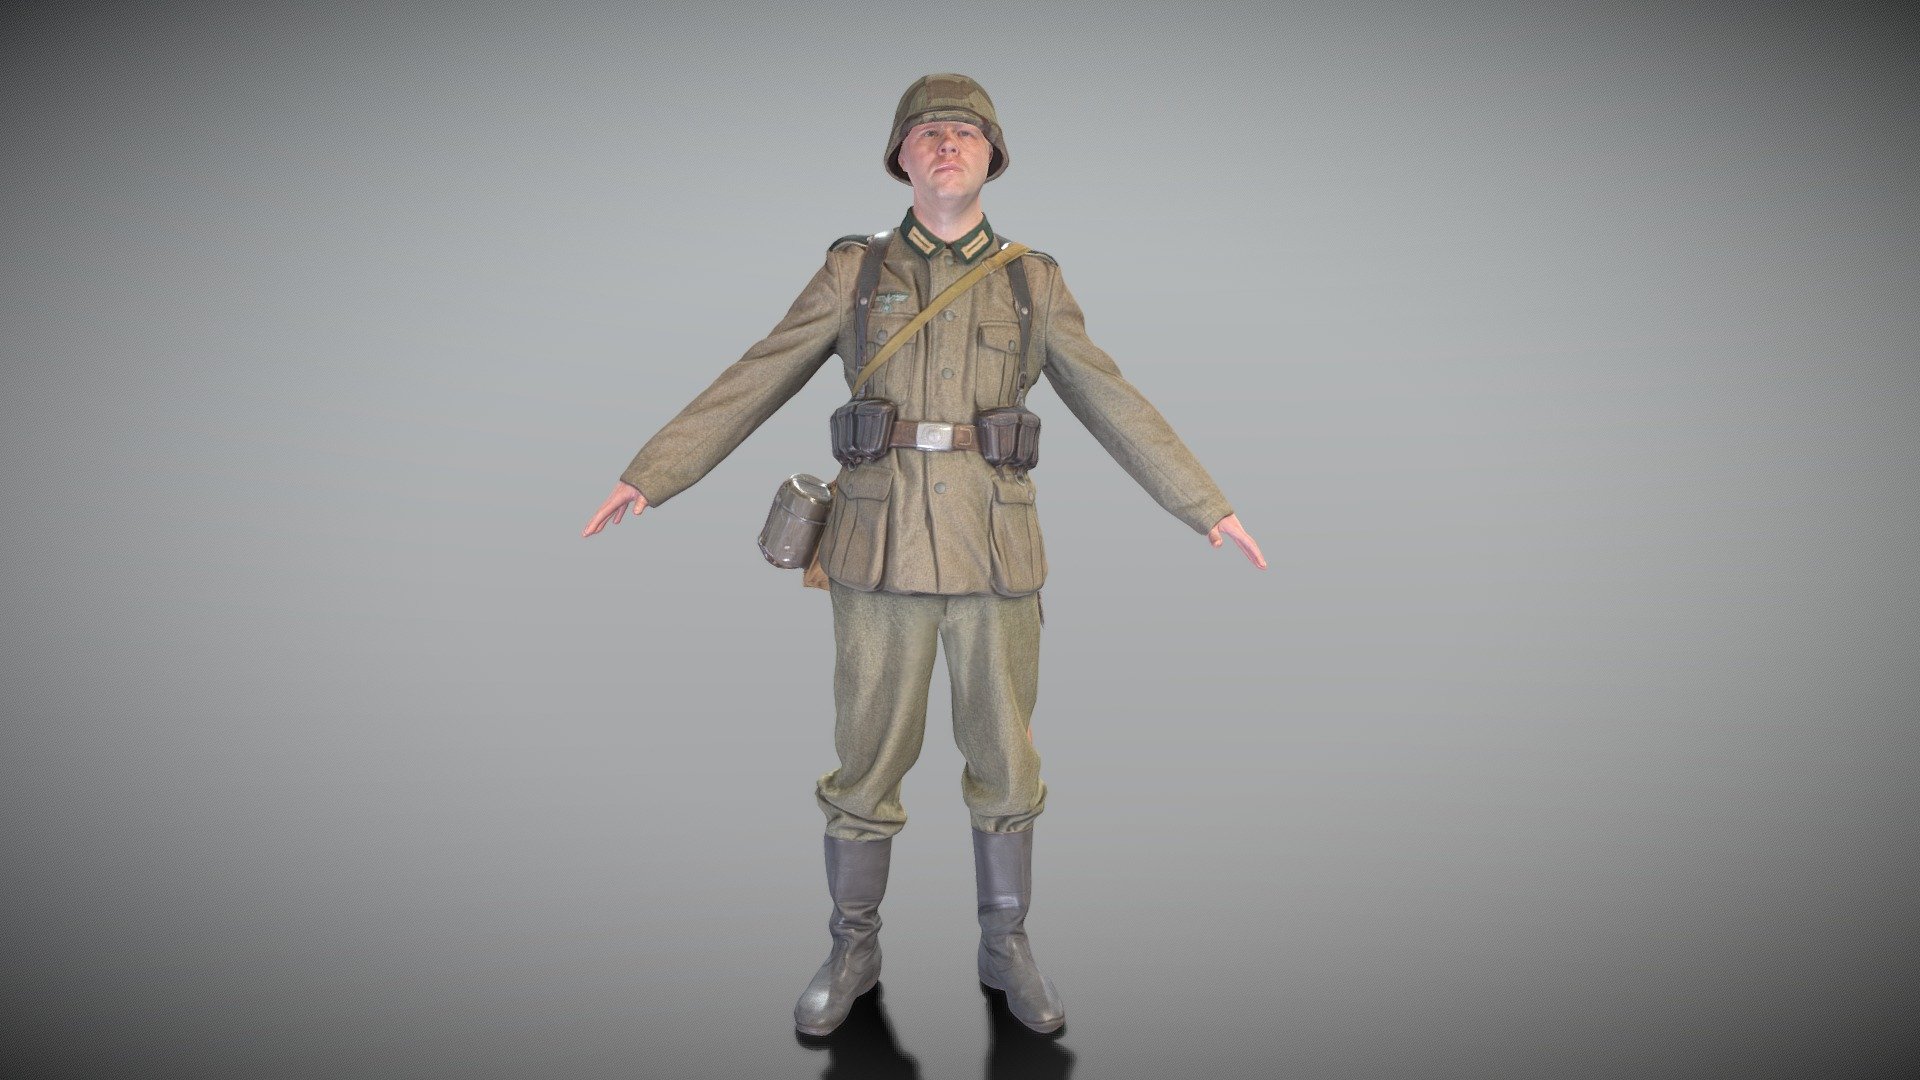 This is a true human size and detailed model of a brave soldier dressed in Wehrmacht uniform from 1940s. All props and suit are original. The model is captured in the A-pose with mesh ready for rigging and animation in all most usable 3d software.

Technical specifications:


digital double scan model
low-poly model
high-poly model (.ztl tool with 6 subdivisions) clean and retopologized automatically via ZRemesher
fully quad topology
sufficiently clean
edge Loops based
ready for subdivision
8K texture color map
non-overlapping UV map
ready for animation
PBR textures 8K resolution: Normal, Displacement, Albedo maps

Download package includes a Cinema 4D project file with Redshift shader, OBJ, FBX, STL files, which are applicable for 3ds Max, Maya, Unreal Engine, Unity, Blender, etc. All the textures you will find in the “Tex” folder, included into the main archive.

3D EVERYTHING

Stand with Ukraine! - German Wehrmacht soldier in A-pose 383 - Buy Royalty Free 3D model by deep3dstudio 3d model